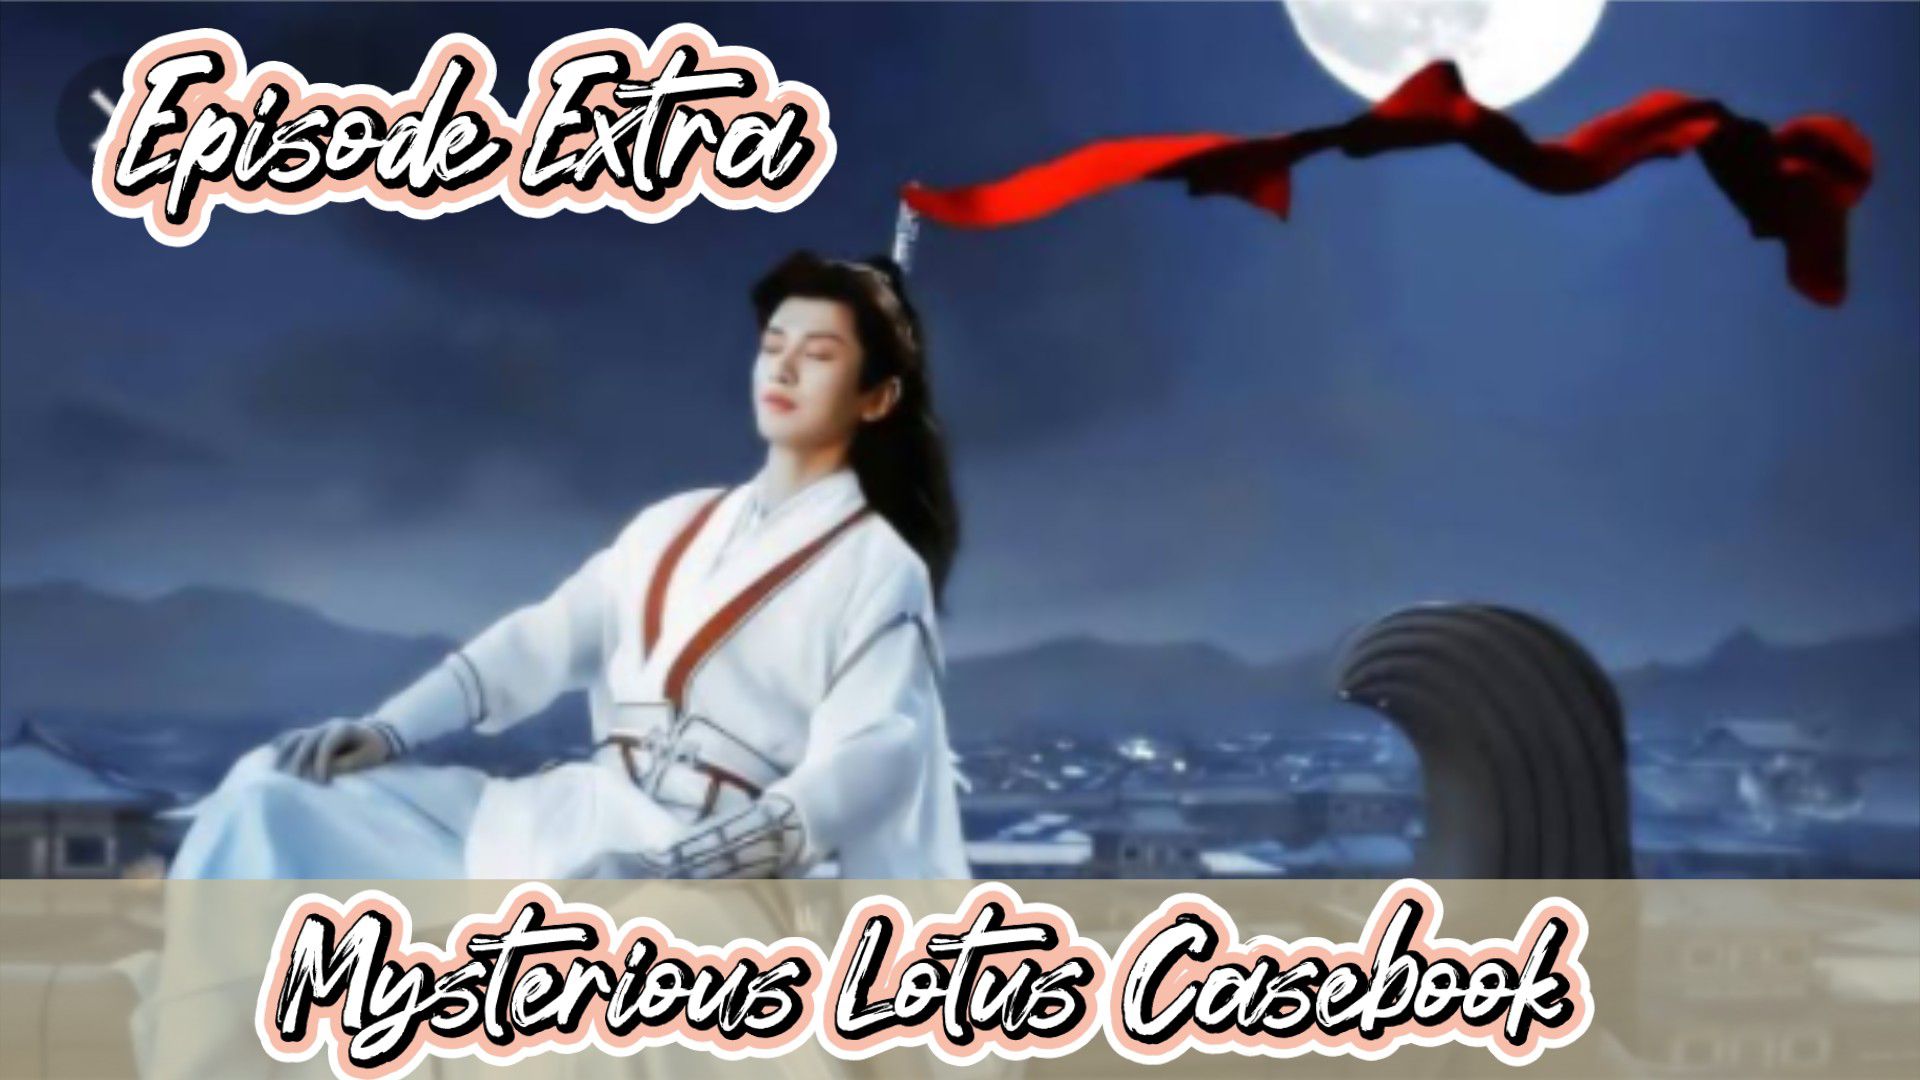 Mysterious Lotus Casebook (2023) Full online with English subtitle